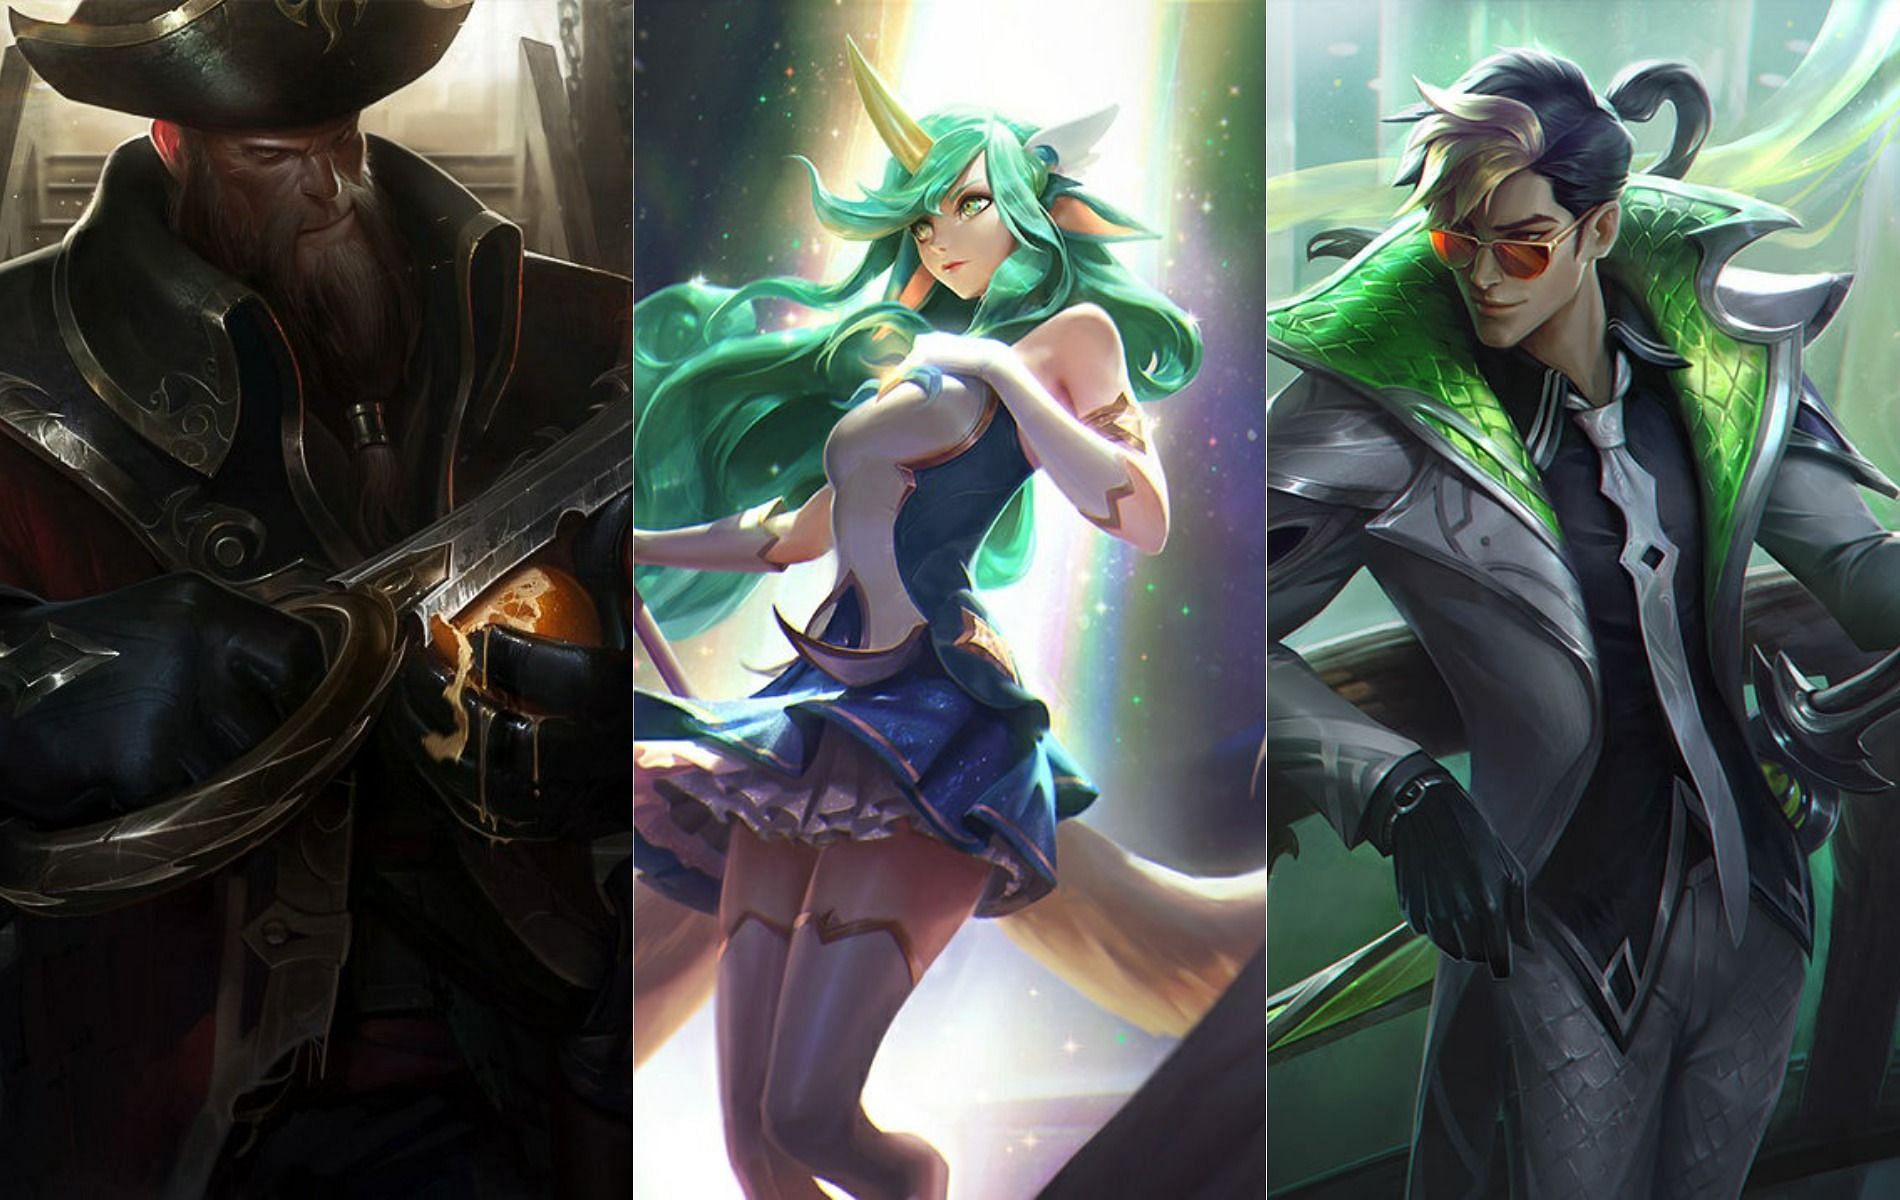 Master Yi, Gangplank, and Grevious Wounds changes to hit the Rift in future League of Legends patches (Images via League of Legends)